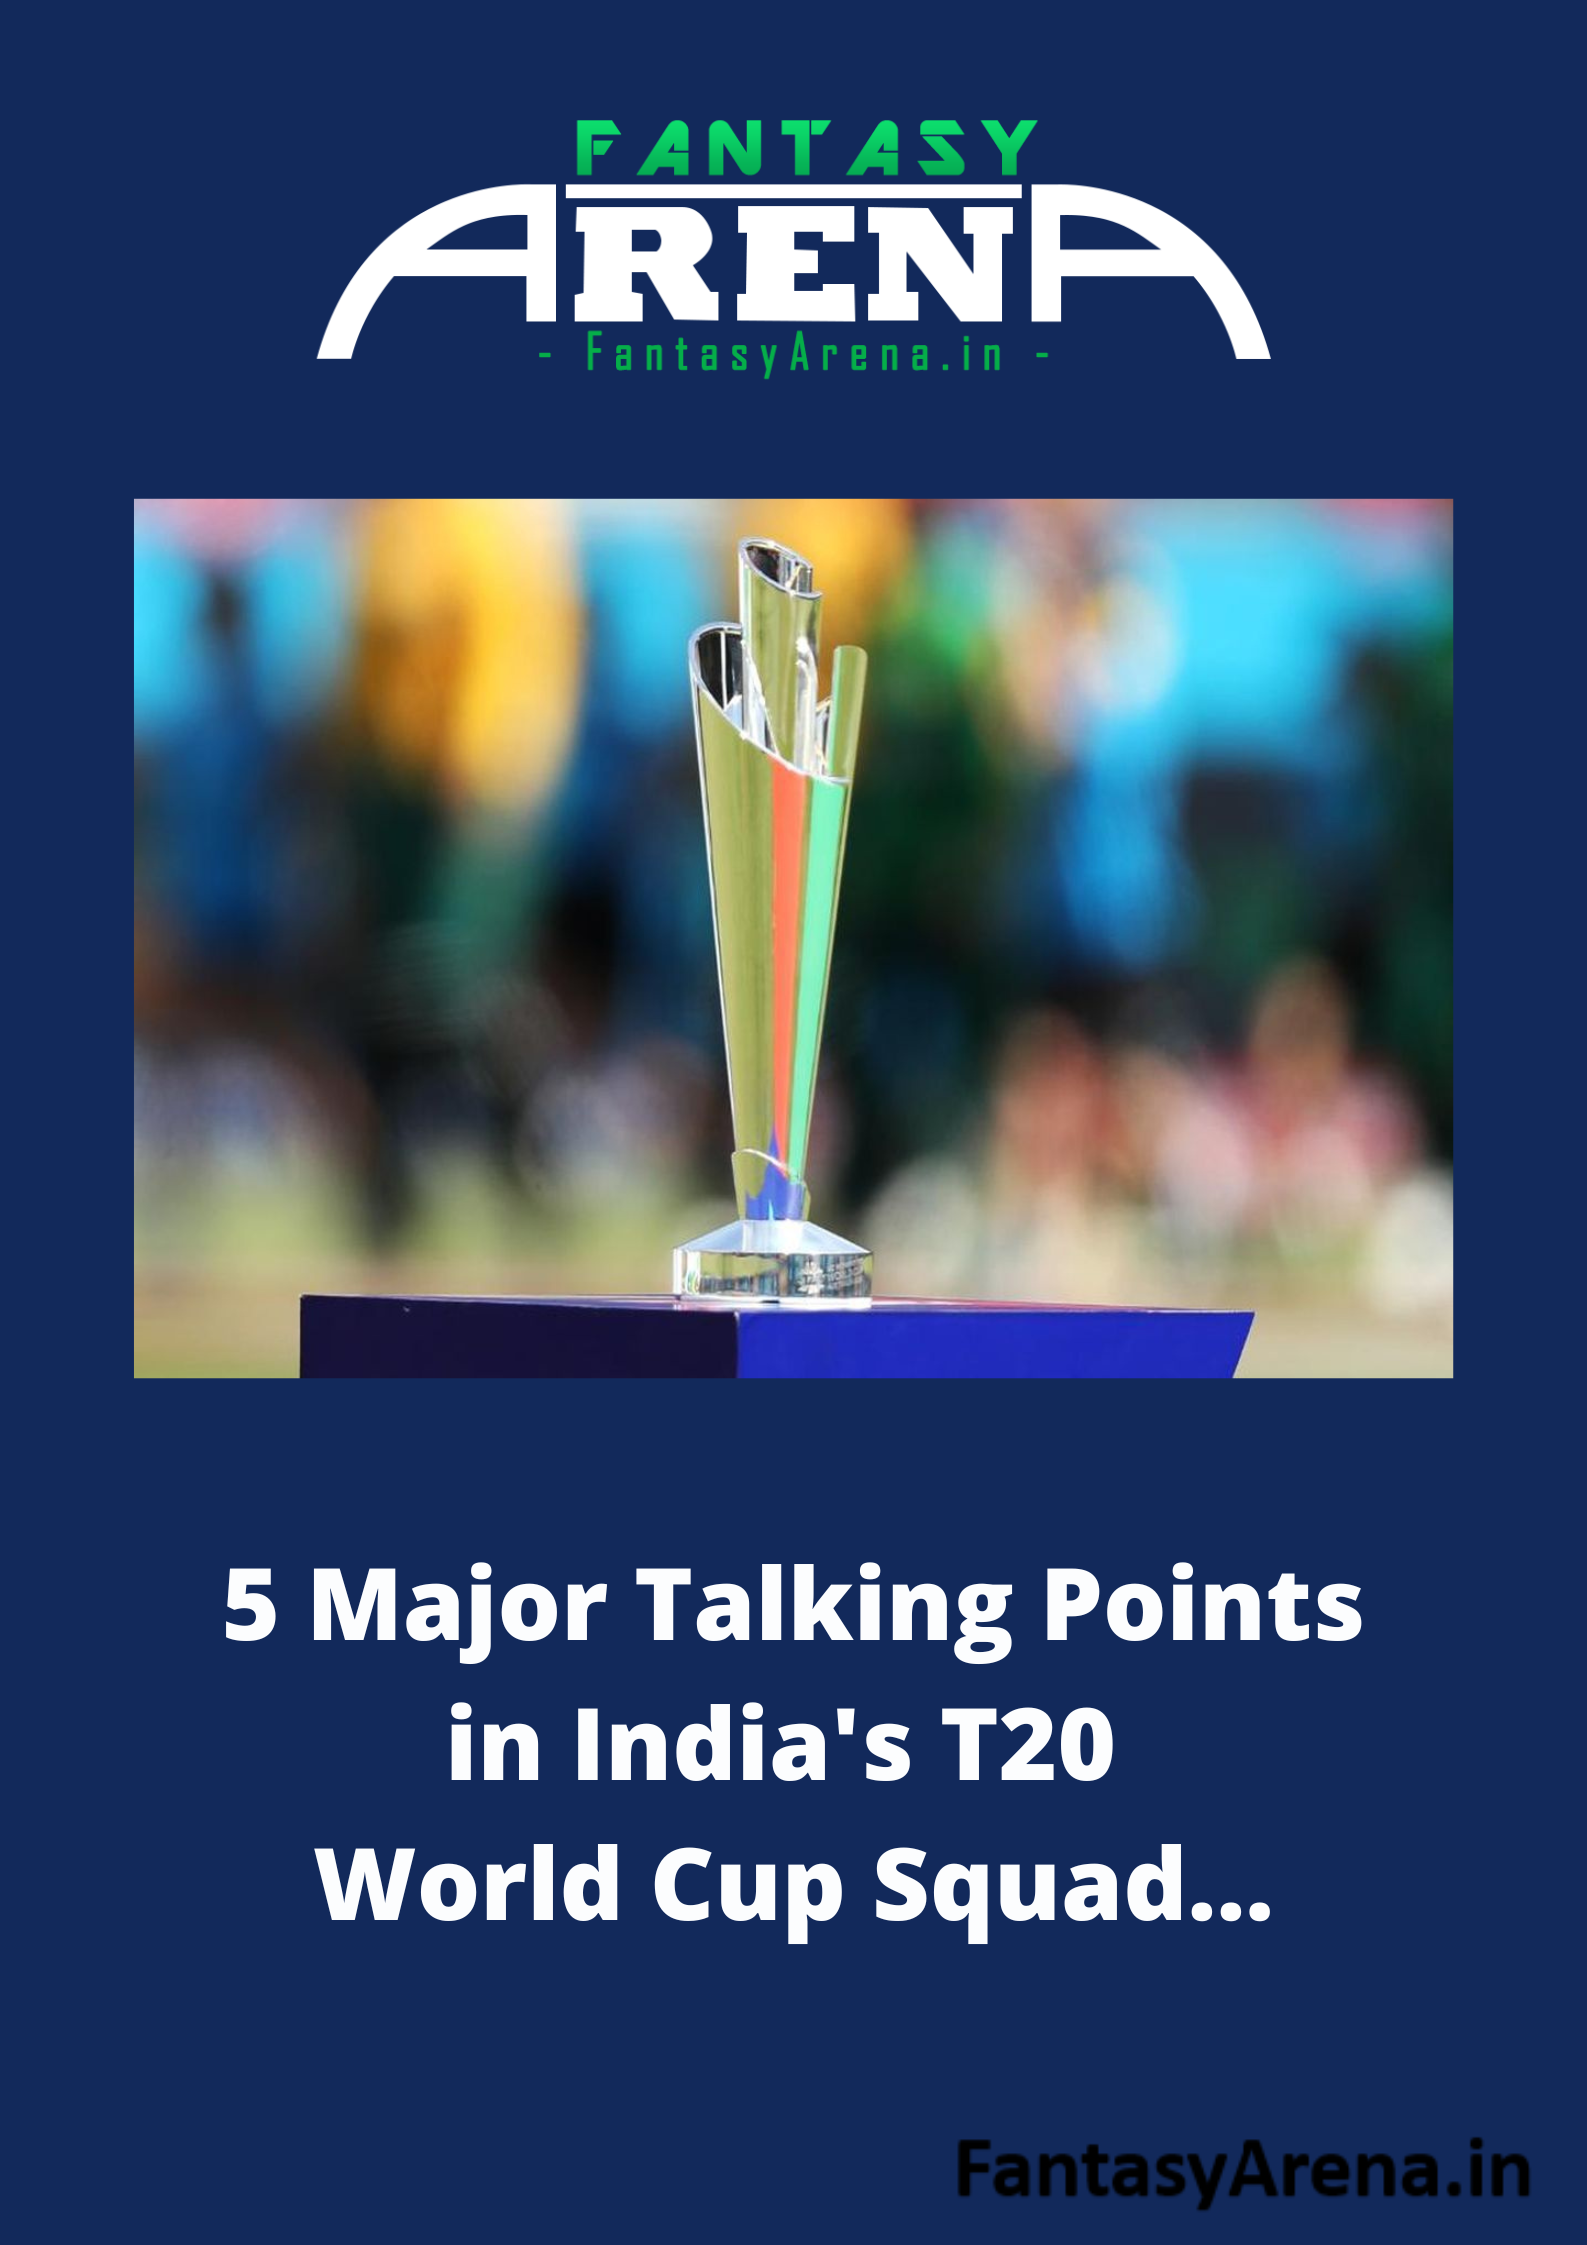 5 Major Talking Points from India's T20 World Cup Squad...